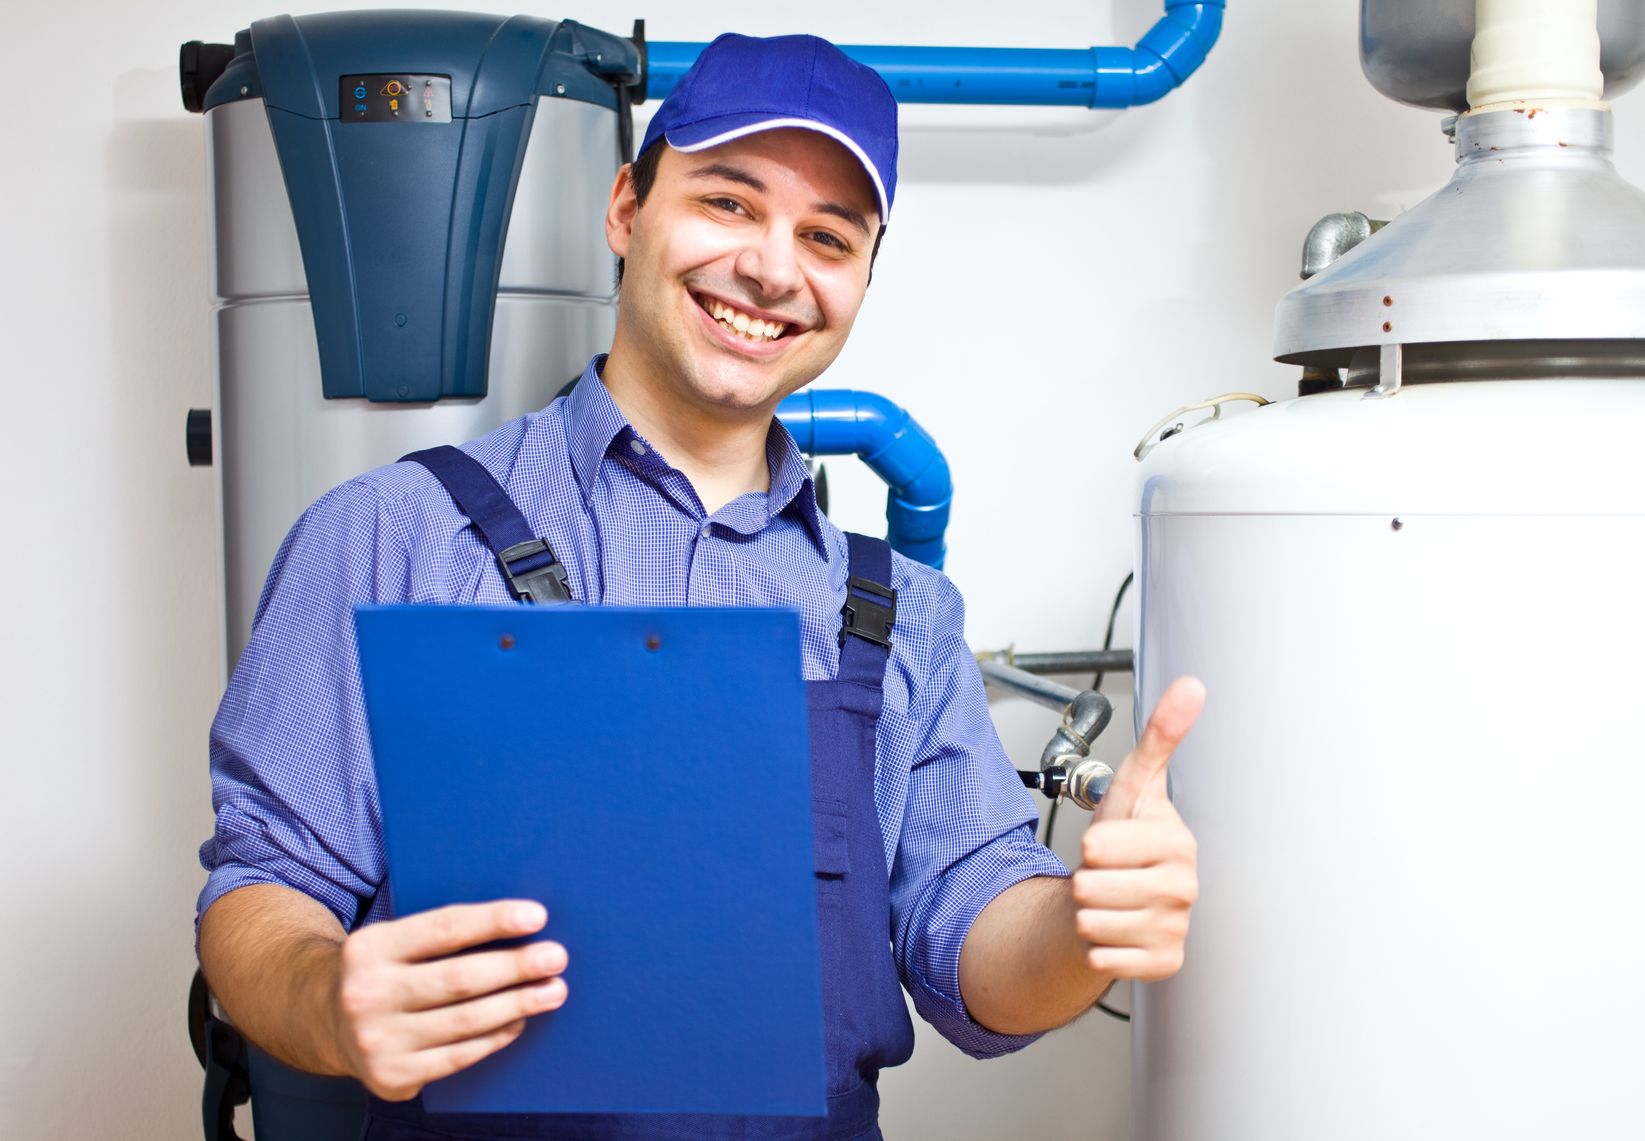 The Professionals Can Provide You with Excellent Water Heater Services